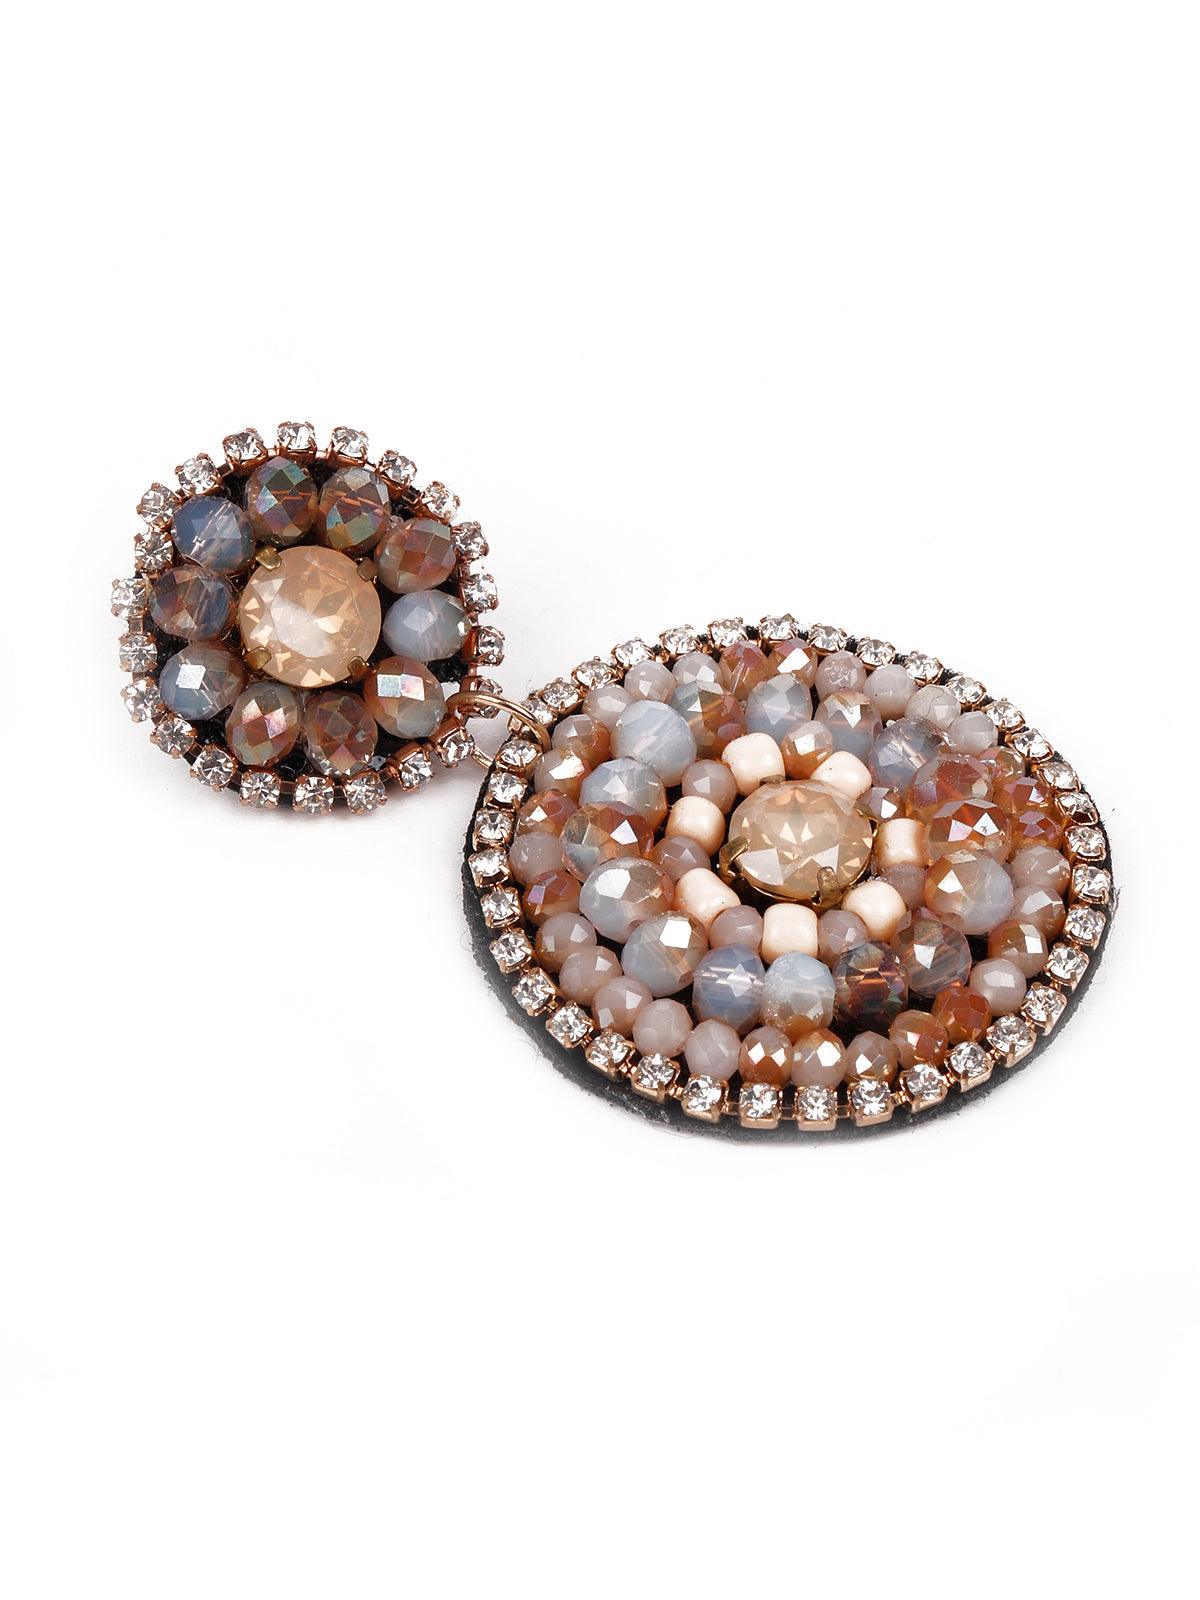 Peach faux beaded rounded statement earrings - Odette